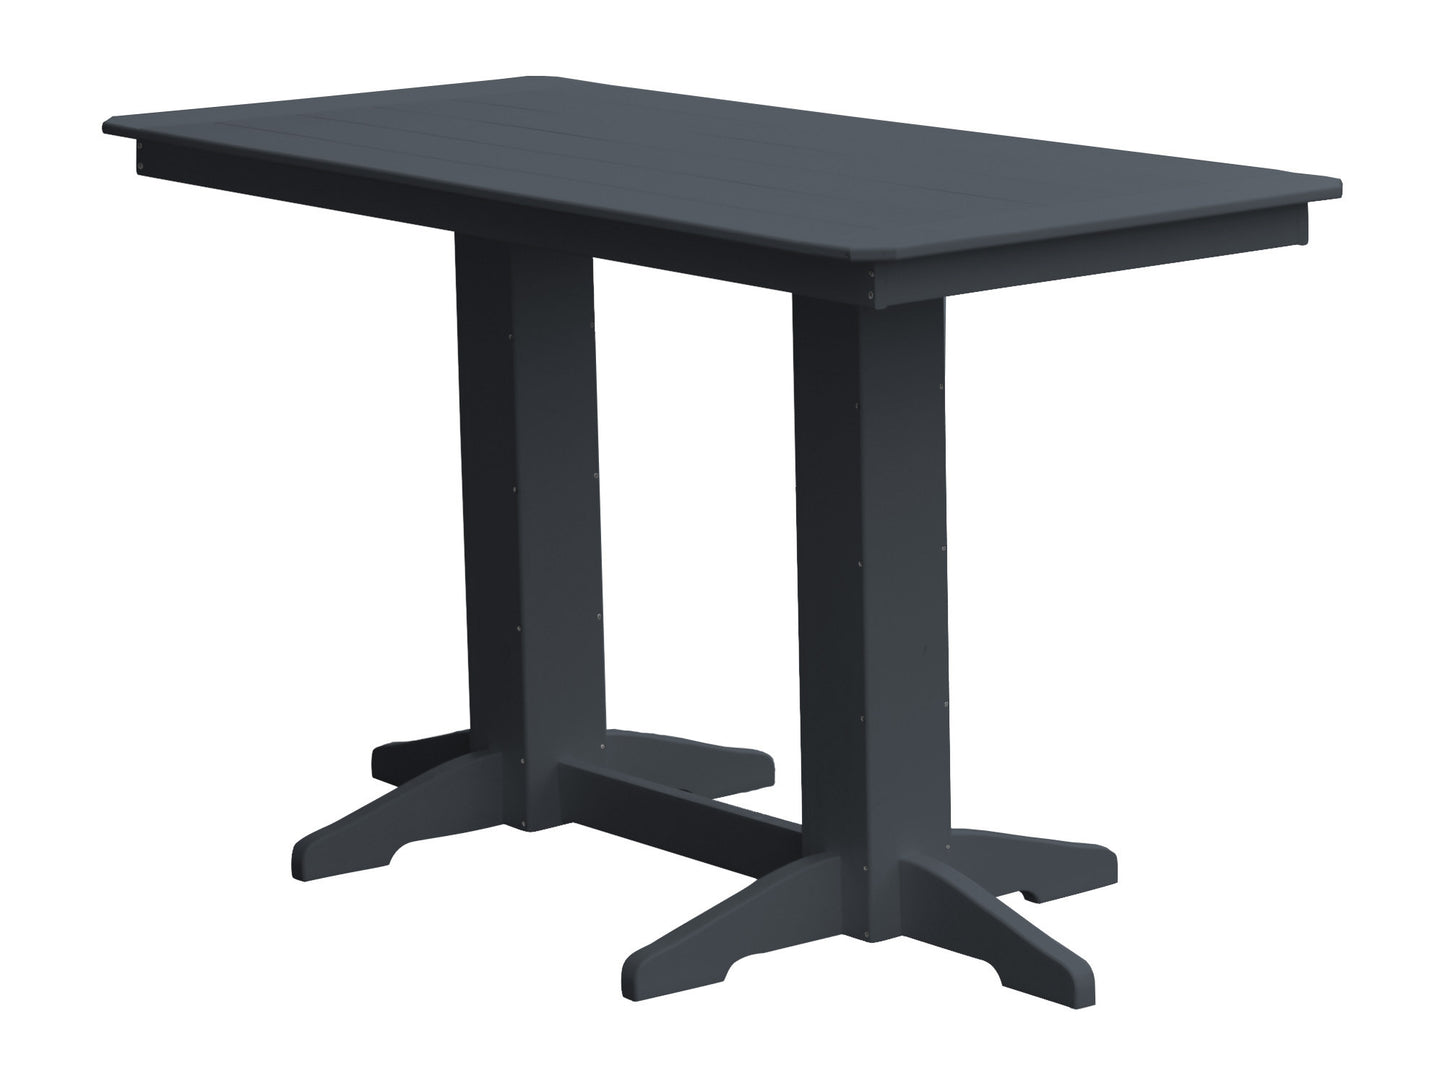 A&L Furniture Recycled Plastic 6' Bar Table - Dark Gray